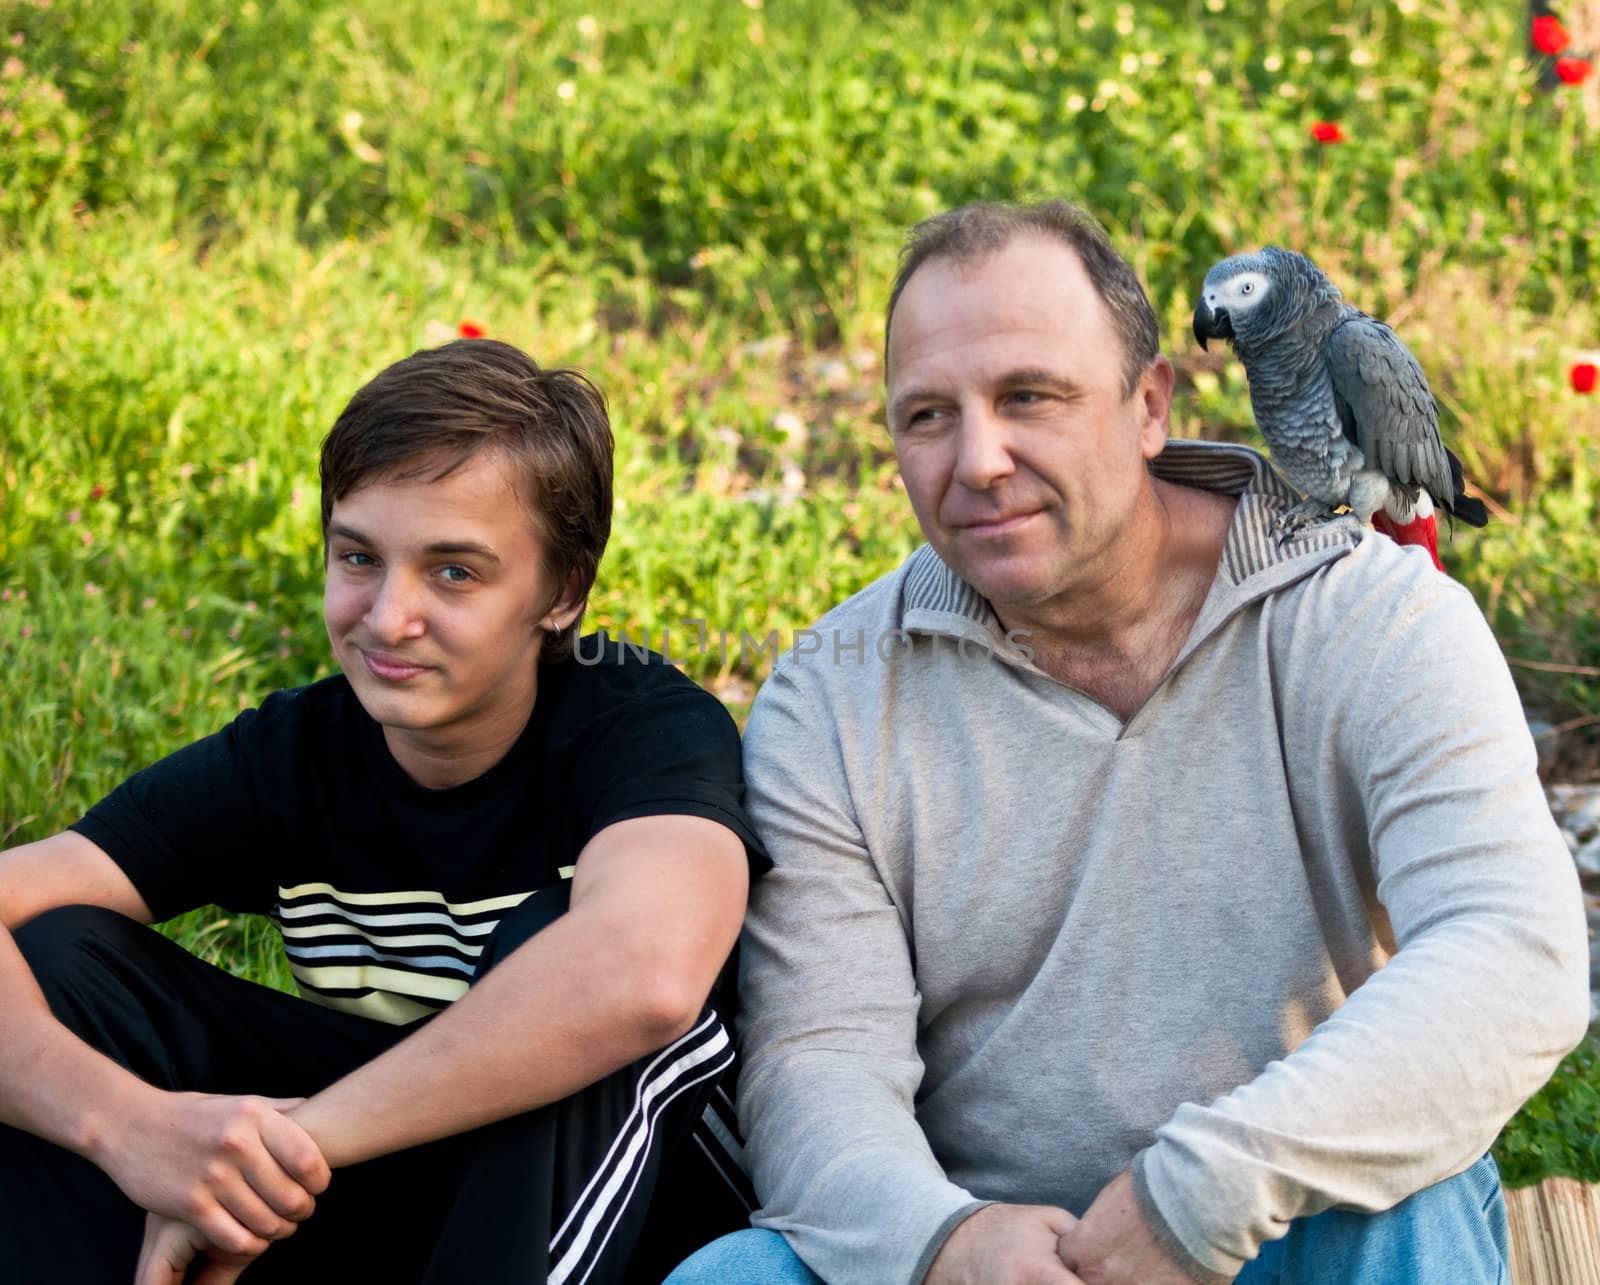 The teenager and his dad with a gray parrot Jaco. by LarisaP